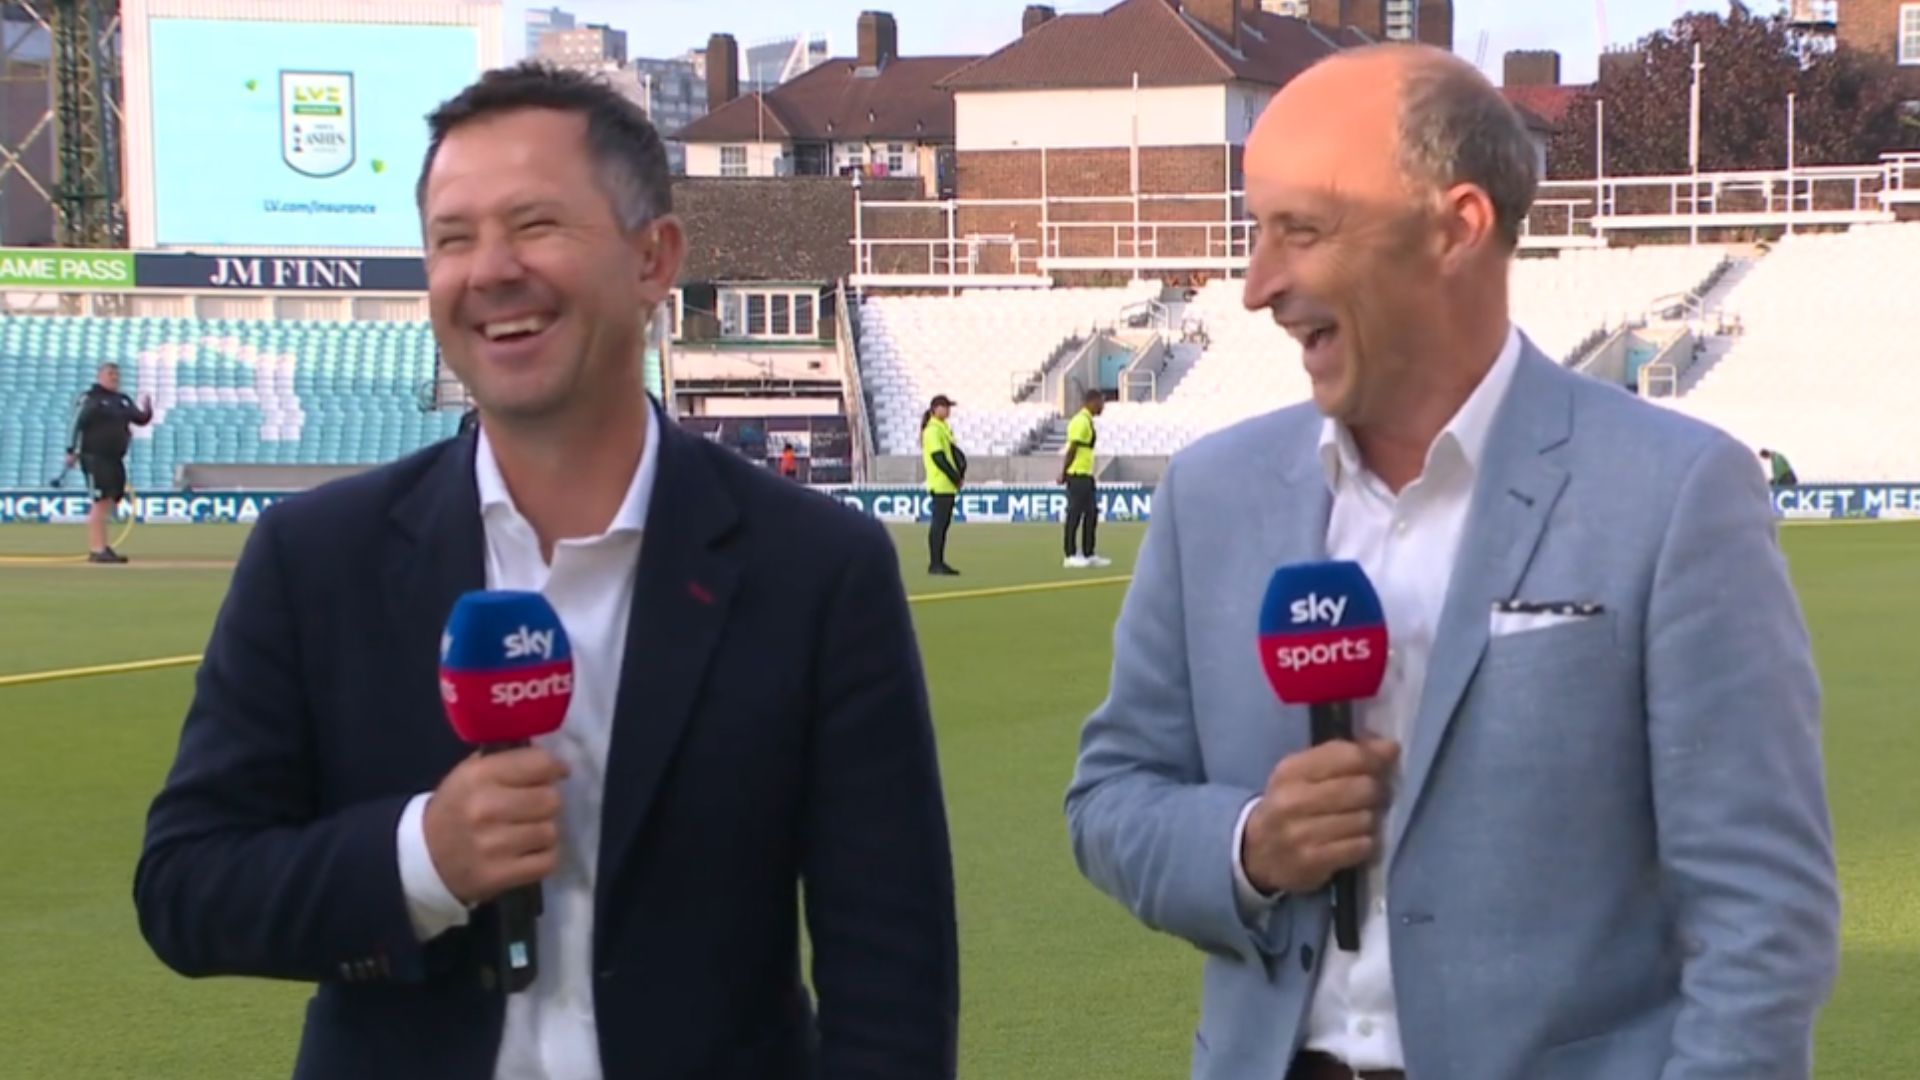 Snippet from the video posted by Sky Sports Cricket on Twitter